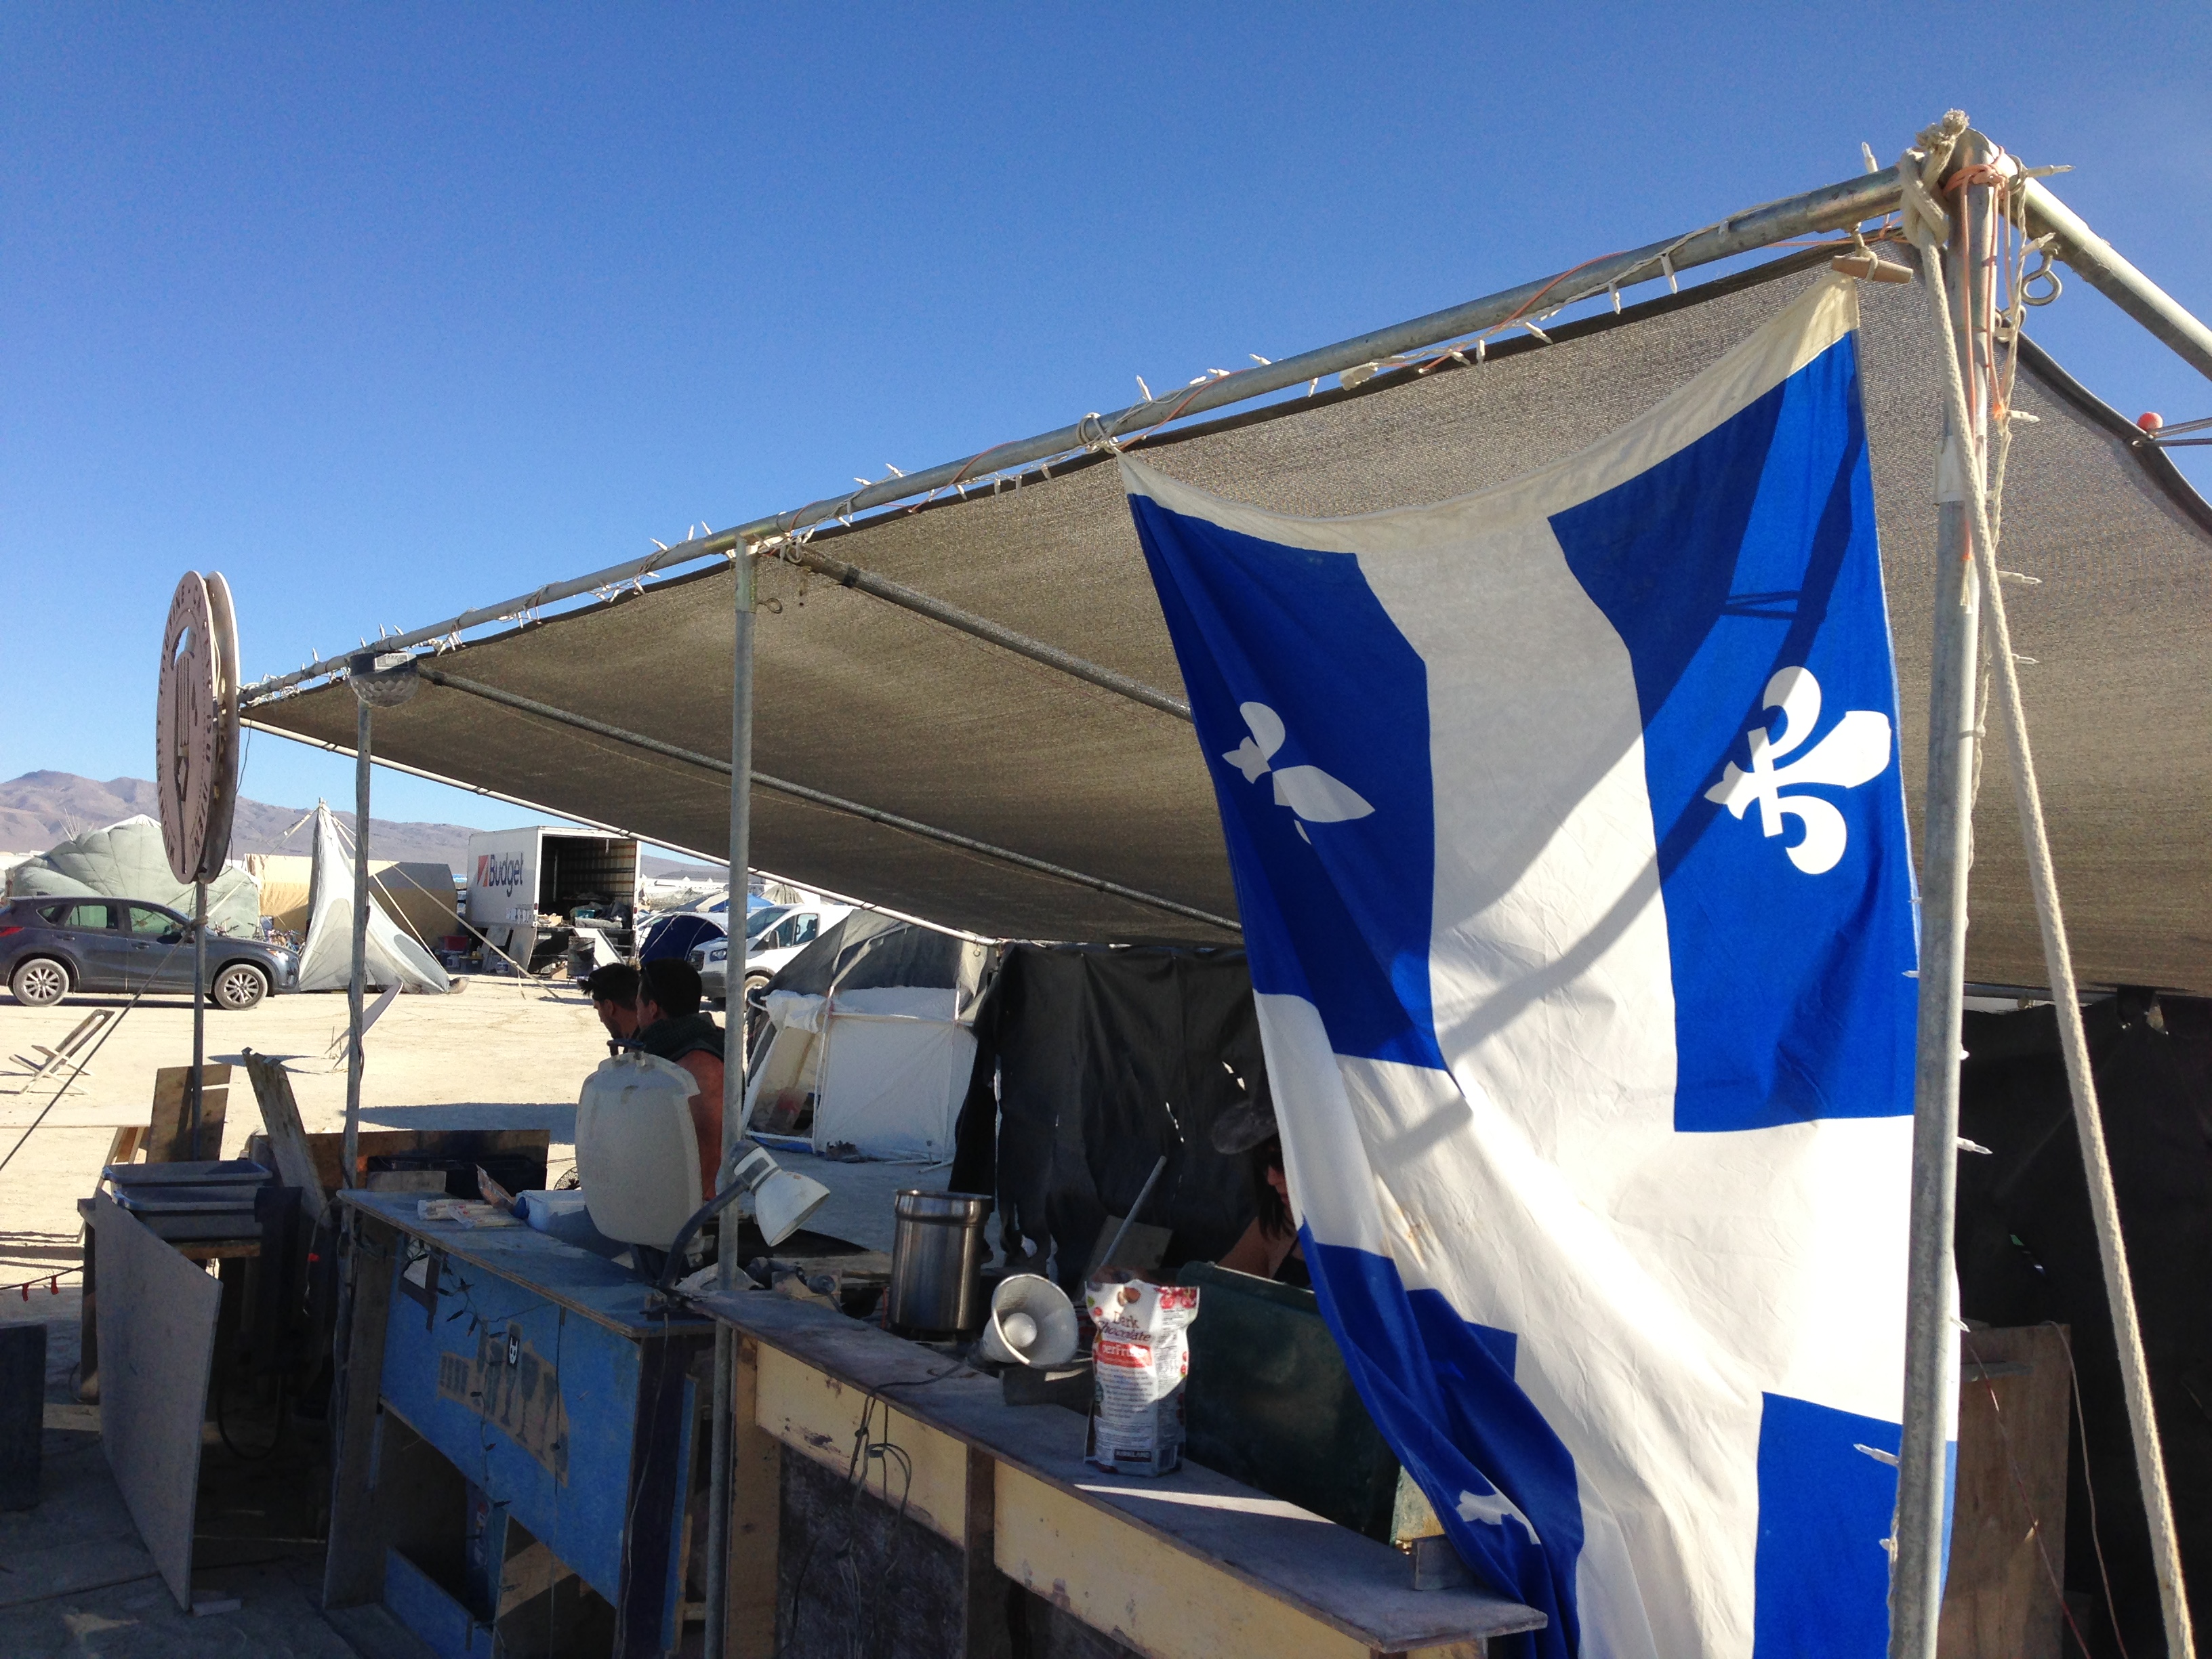 The Quebecois flag.  A welcoming sight far away from home.